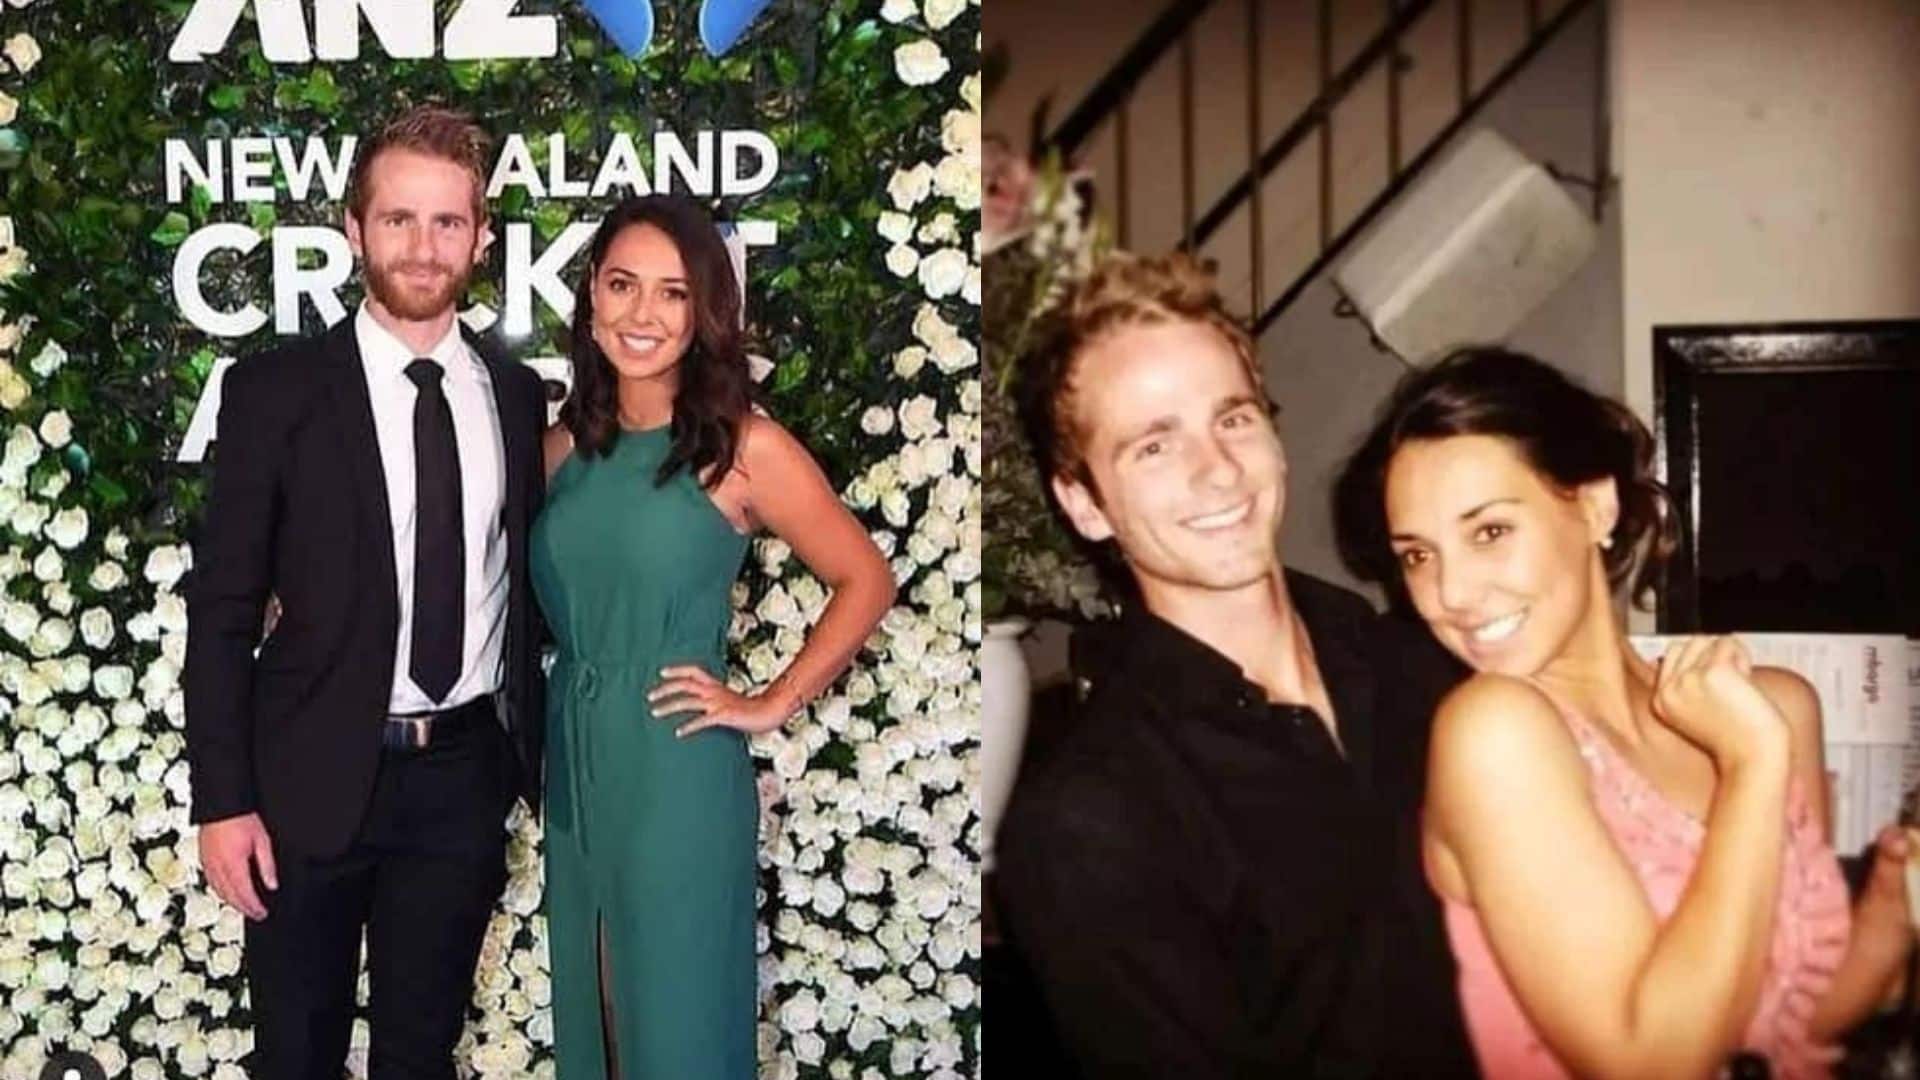 When Kane Williamson Revealed That He Found His Wife Sarah Raheem At The Hospital